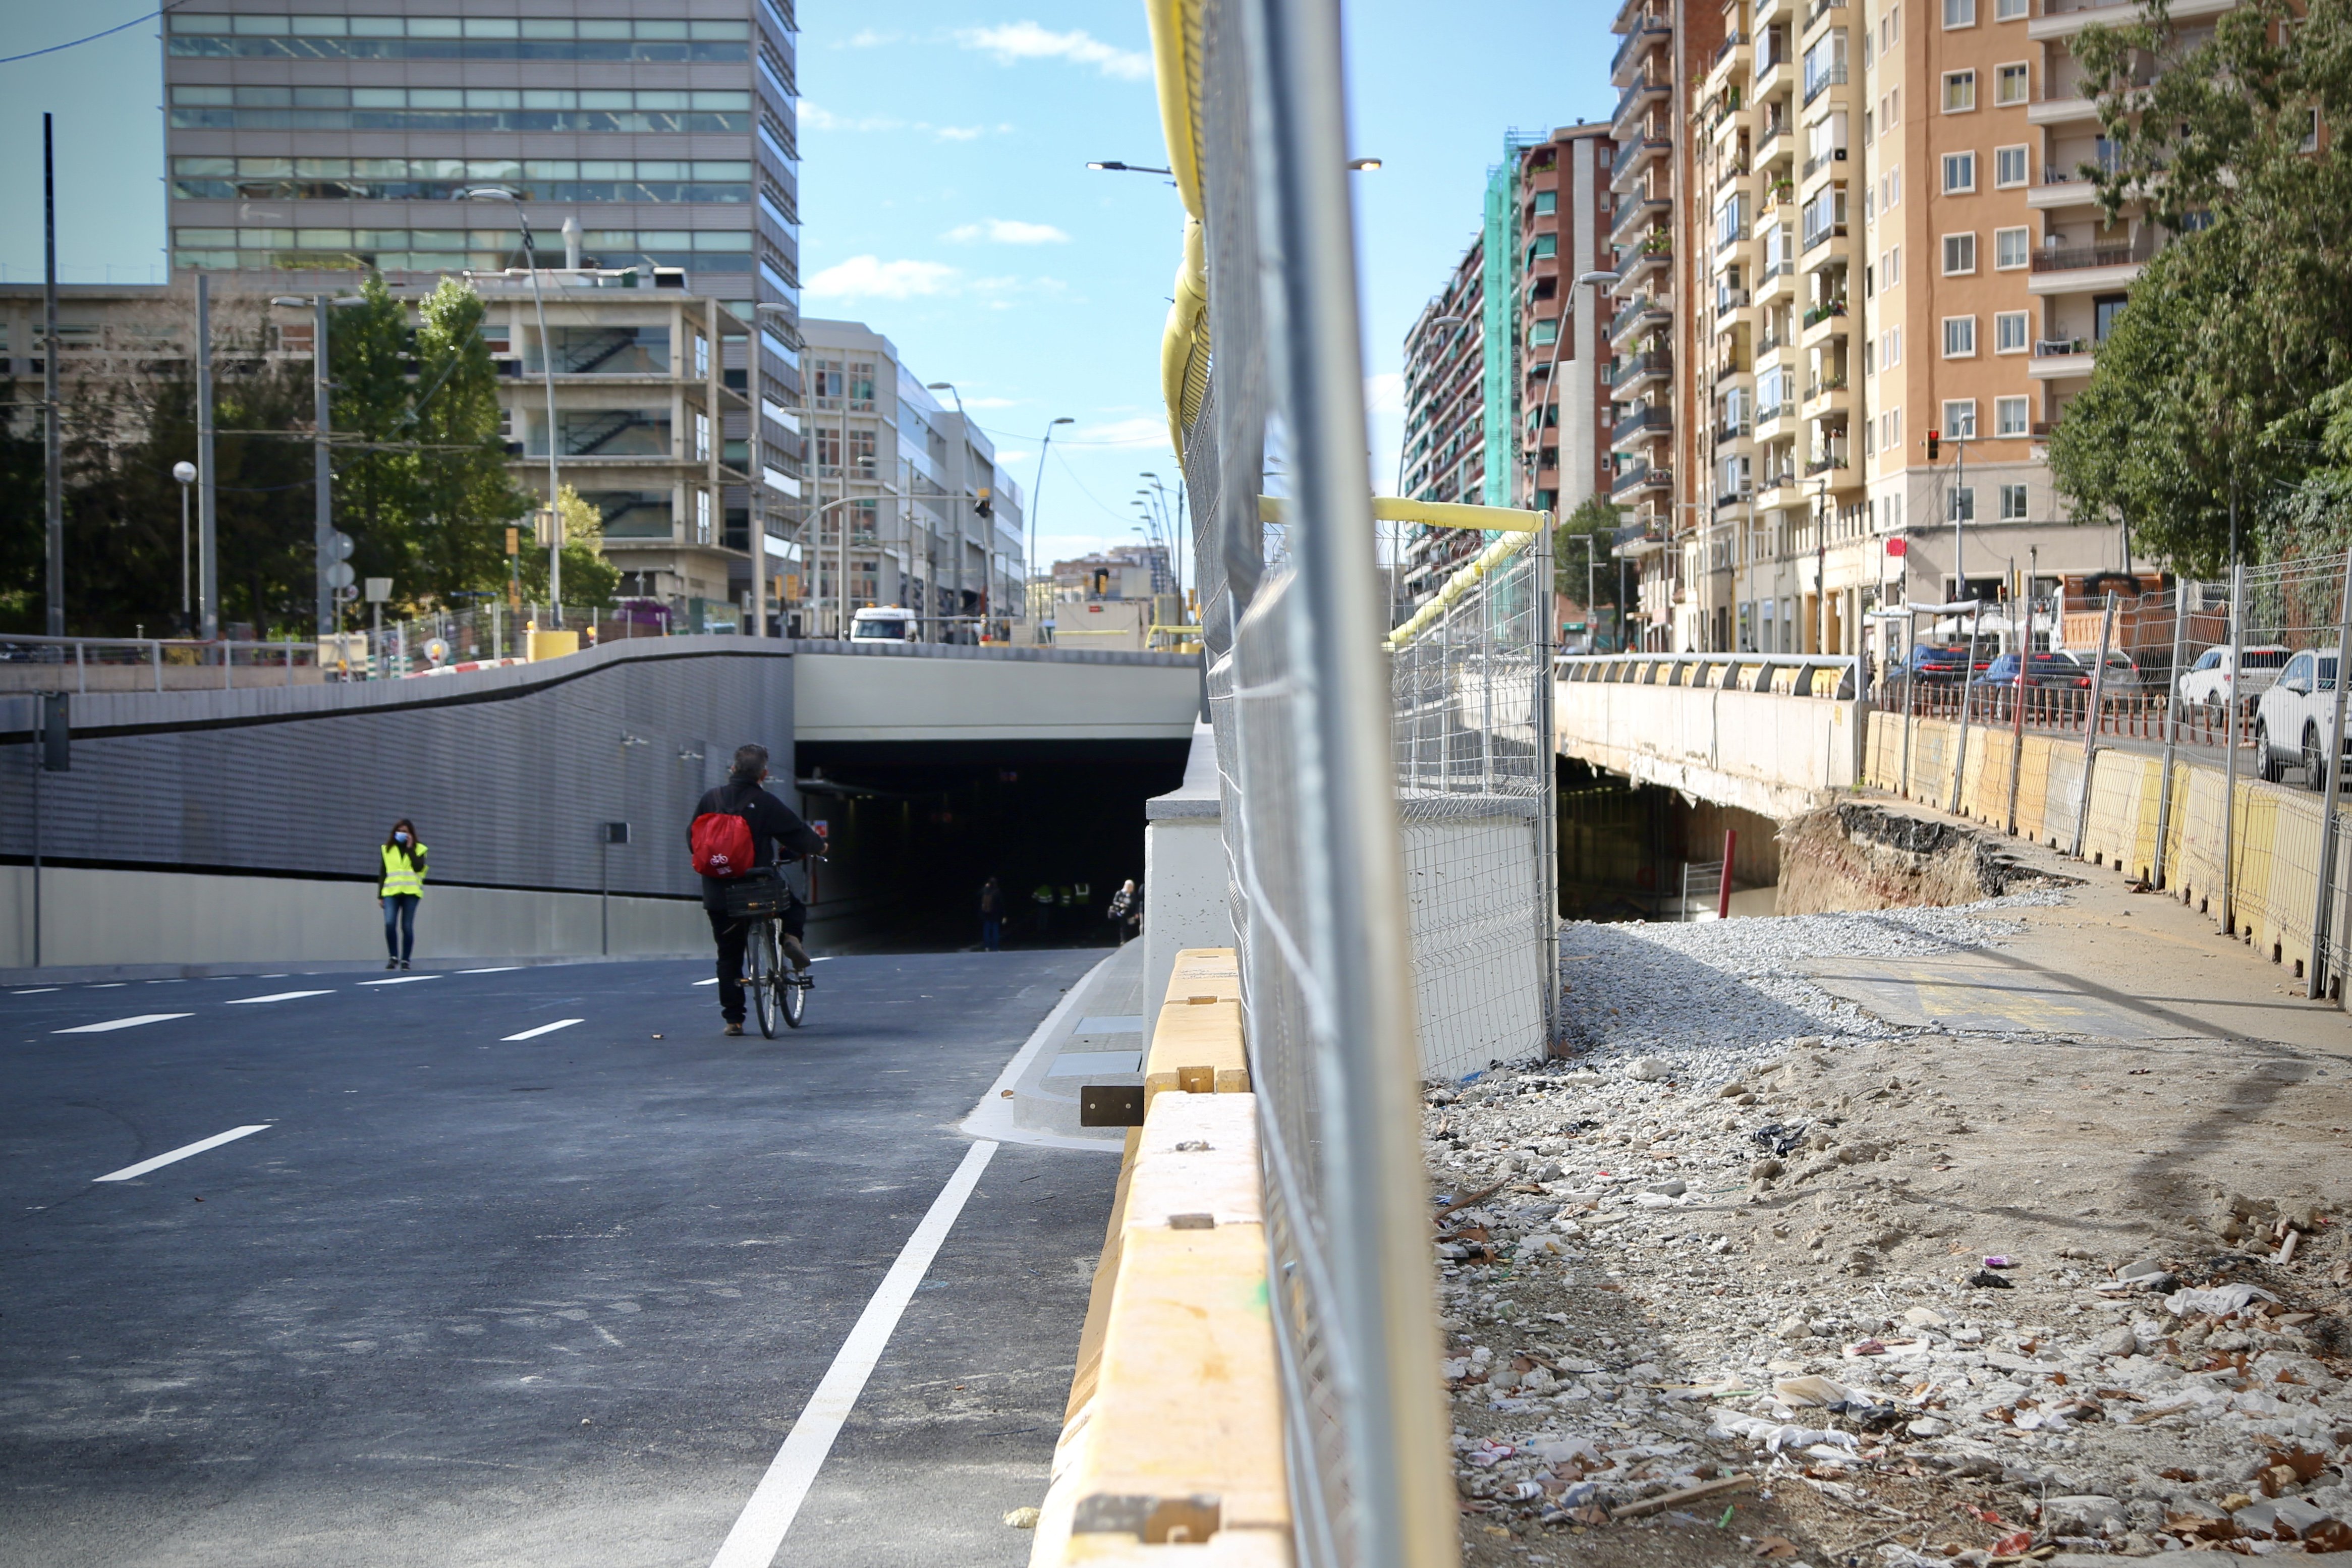 Barcelona under construction: Colau digs up the city, 15 months before elections